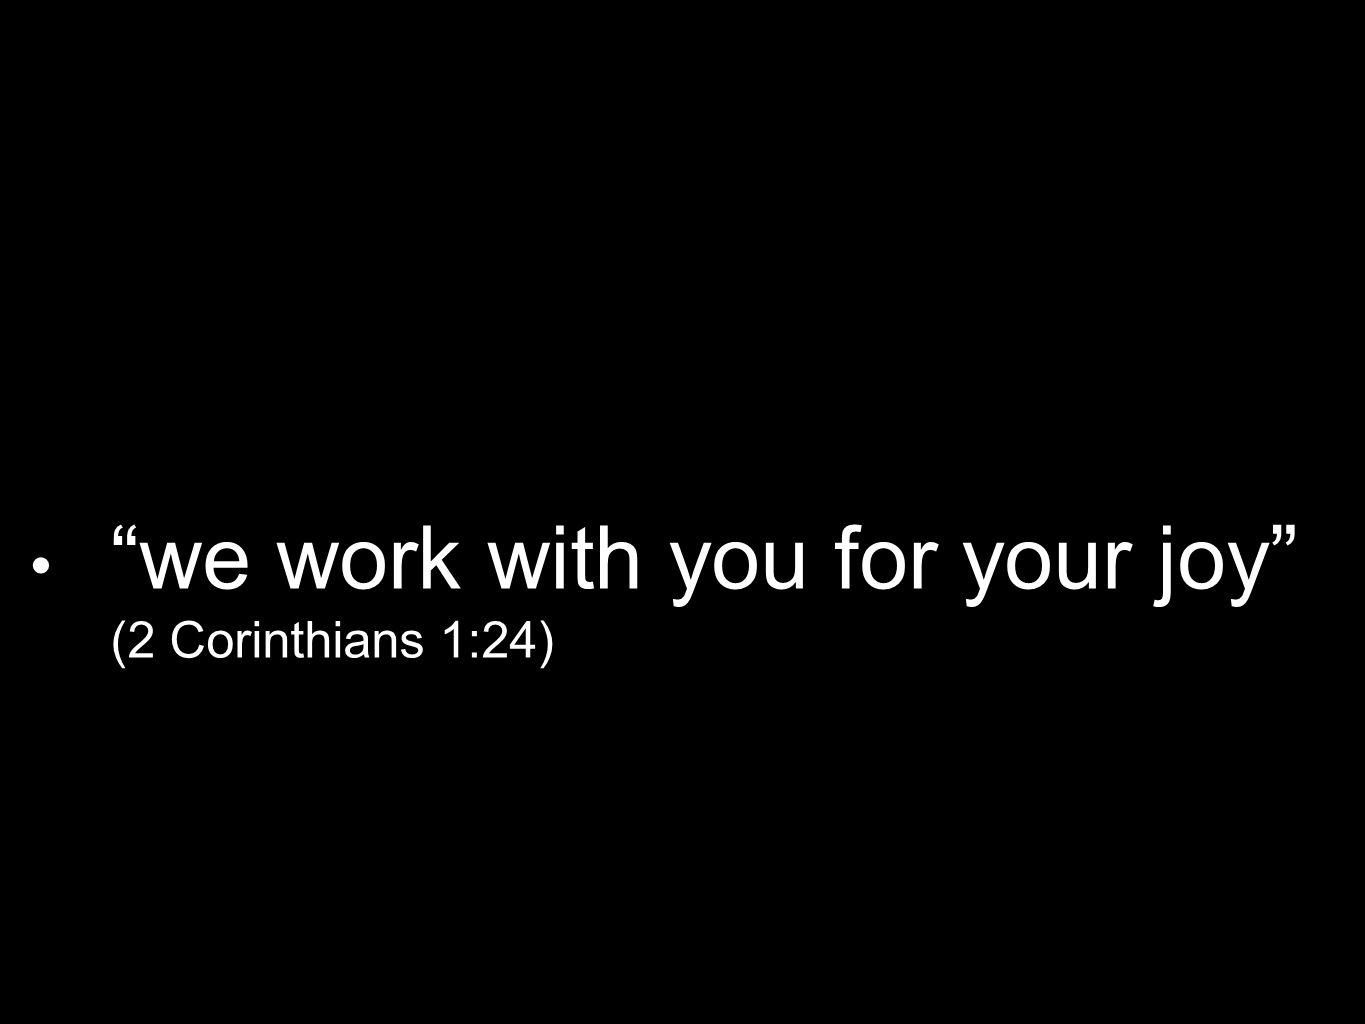 we work with you for your joy (2 Corinthians 1:24)